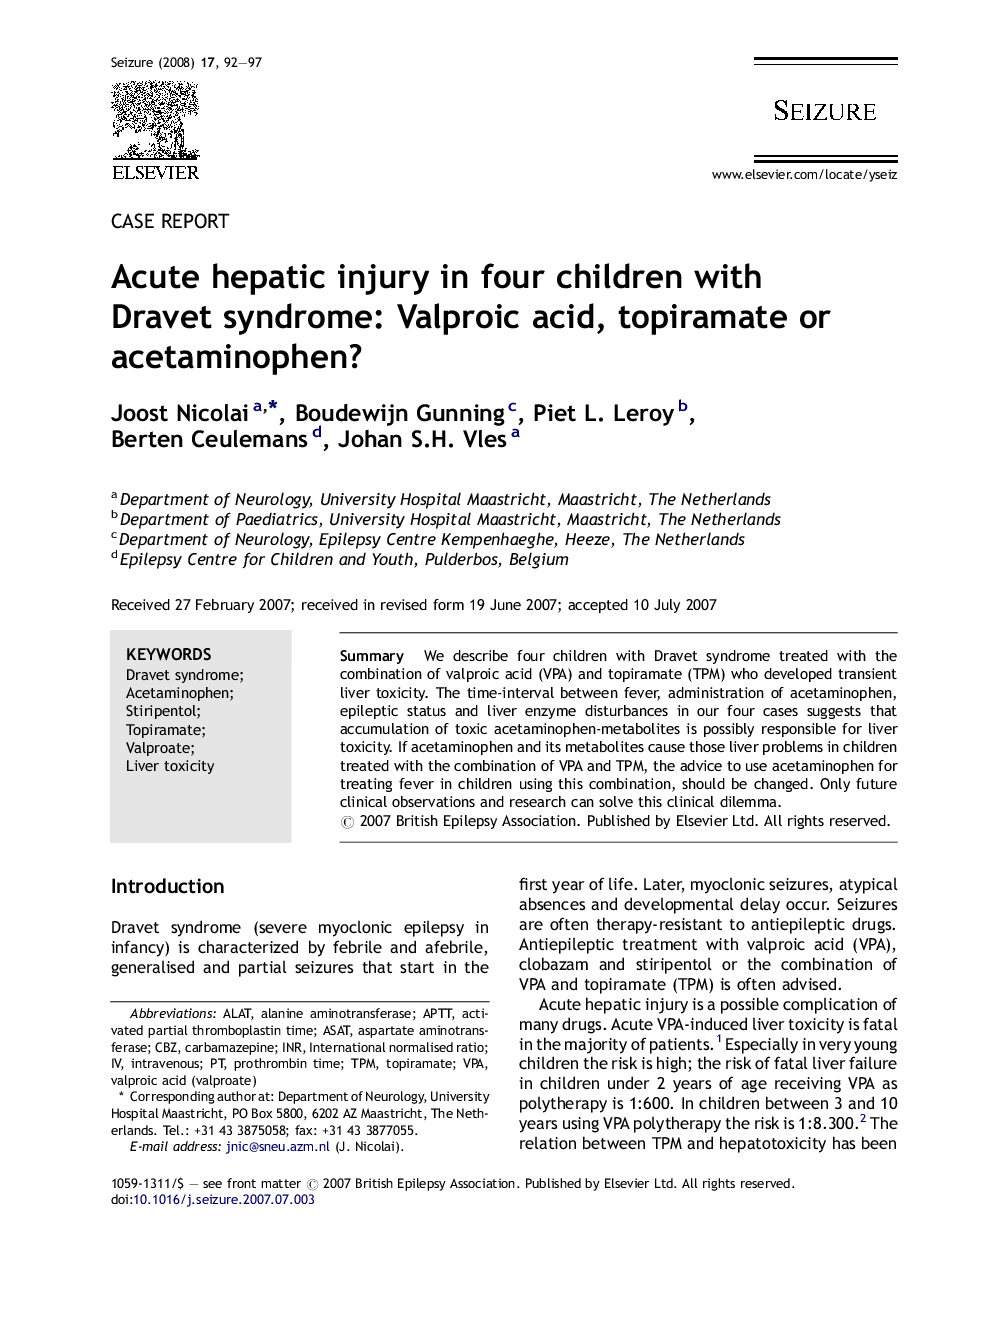 Acute hepatic injury in four children with Dravet syndrome: Valproic acid, topiramate or acetaminophen?